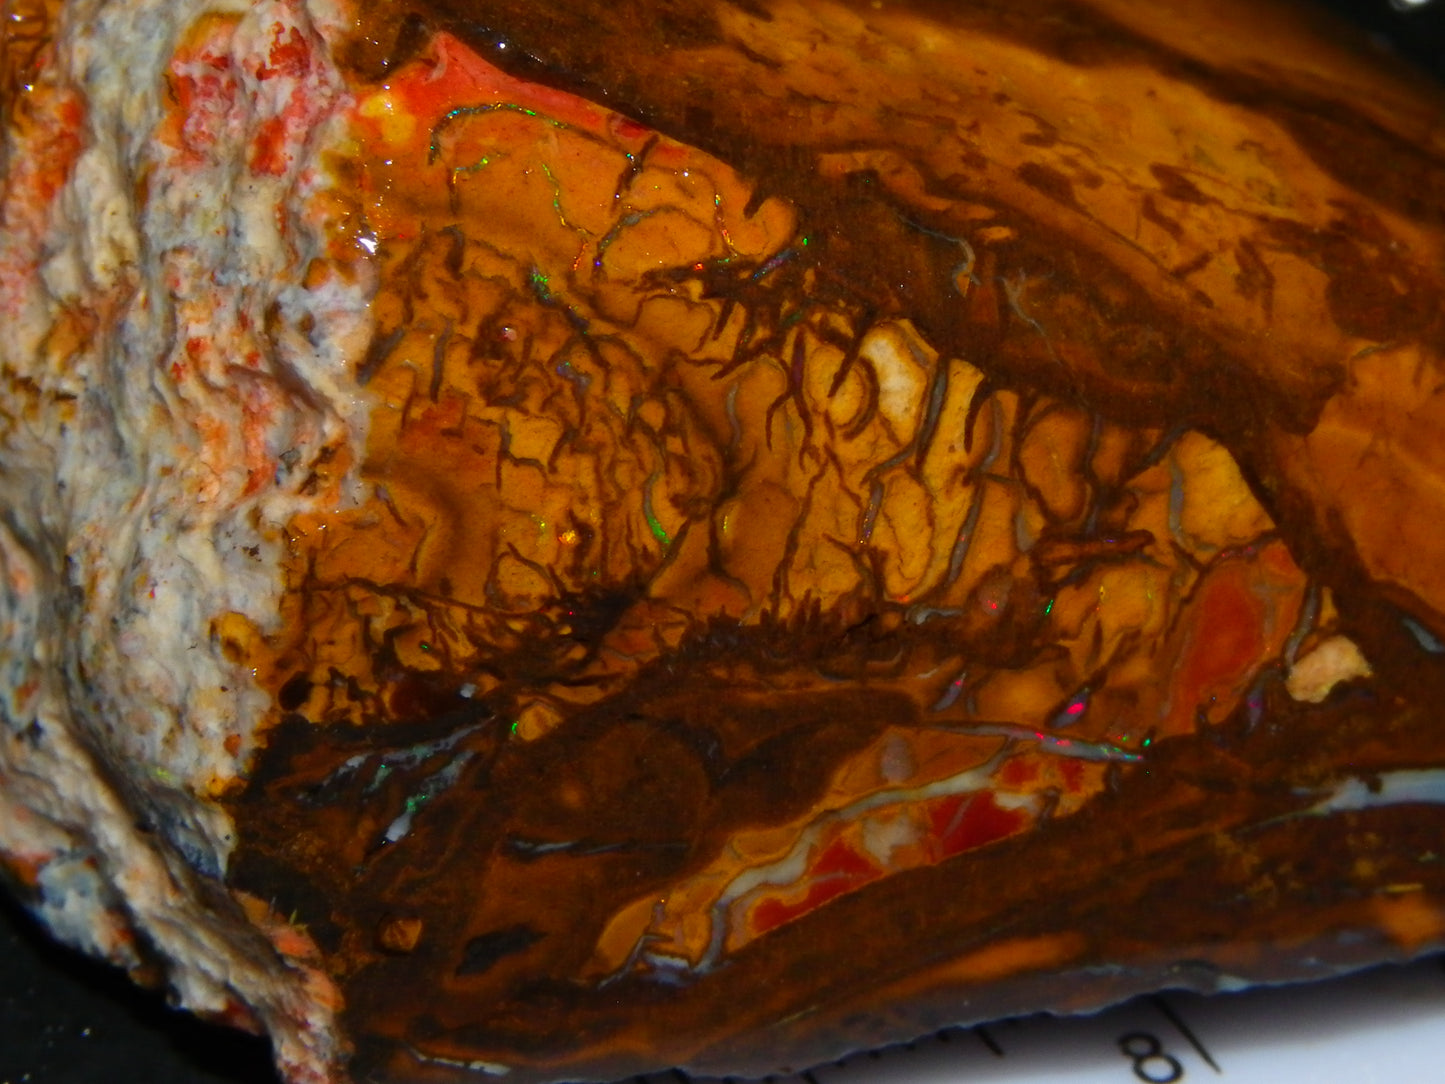 Nice Rubbed/Rough Koroit Opal Specimen 564cts Pattern/Fires Large Size :)